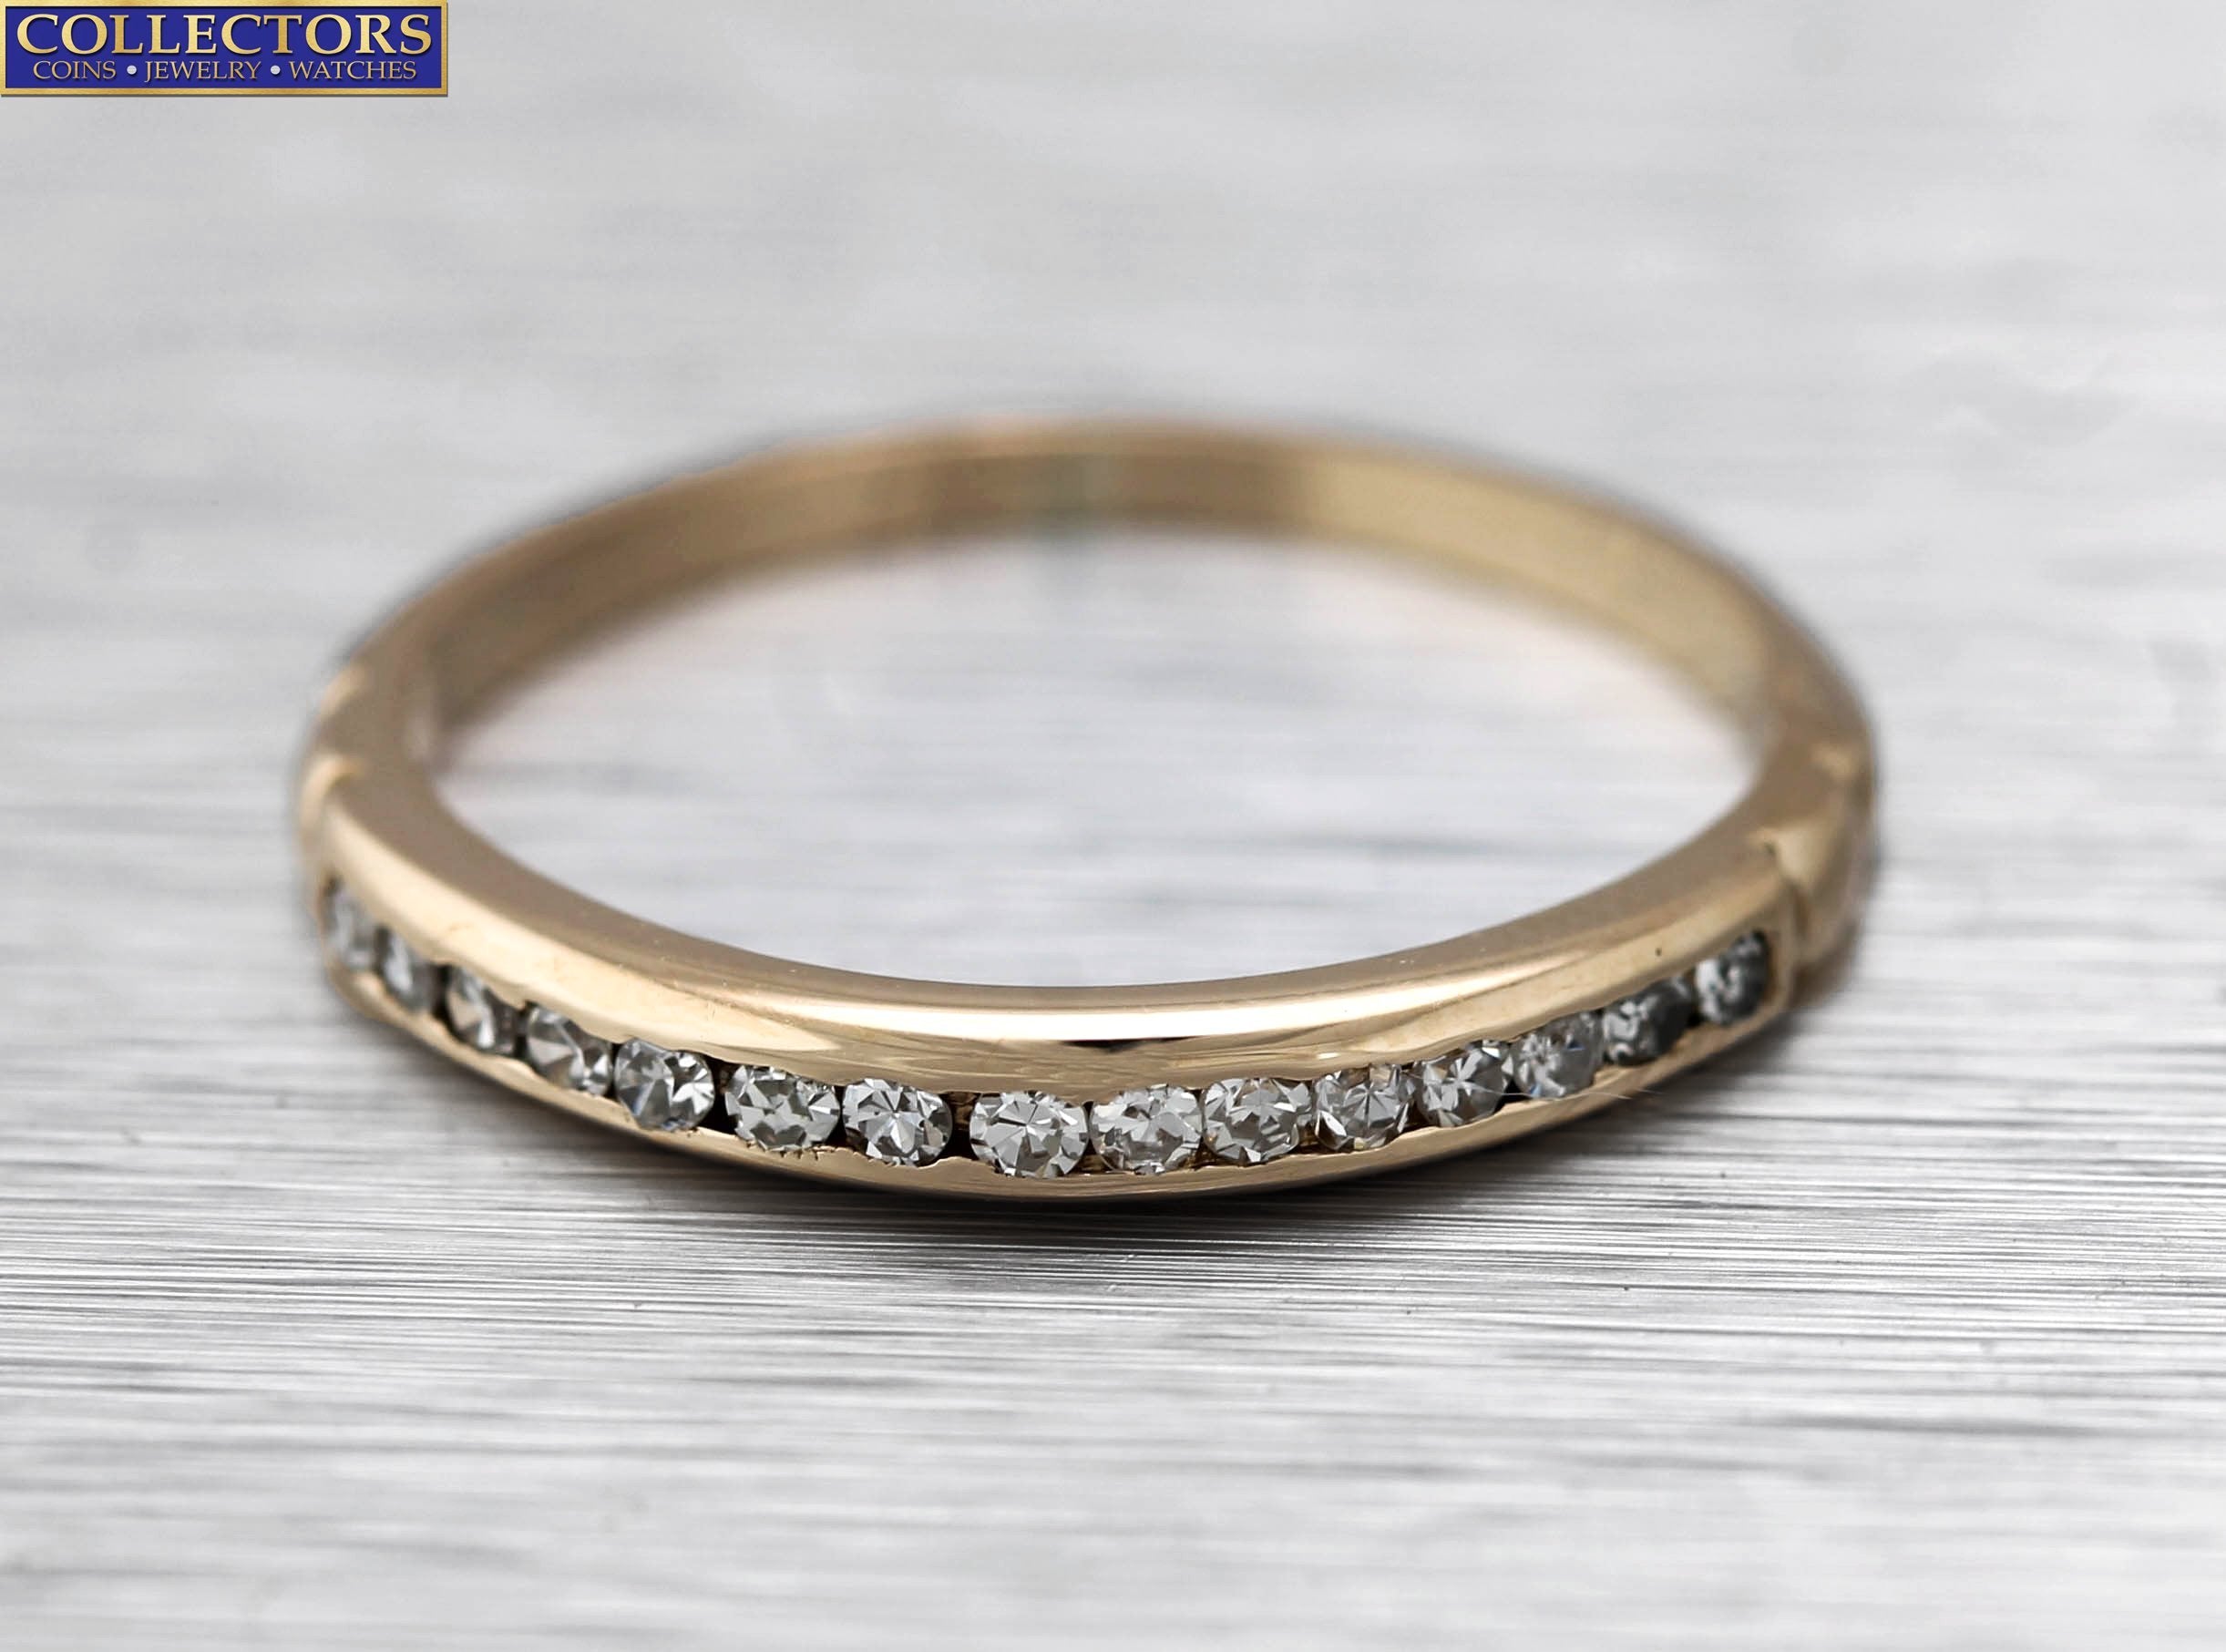 Lovely Ladies Dainty 14K Yellow Gold 3mm Wide 0.15ctw Diamond Stackable Ring